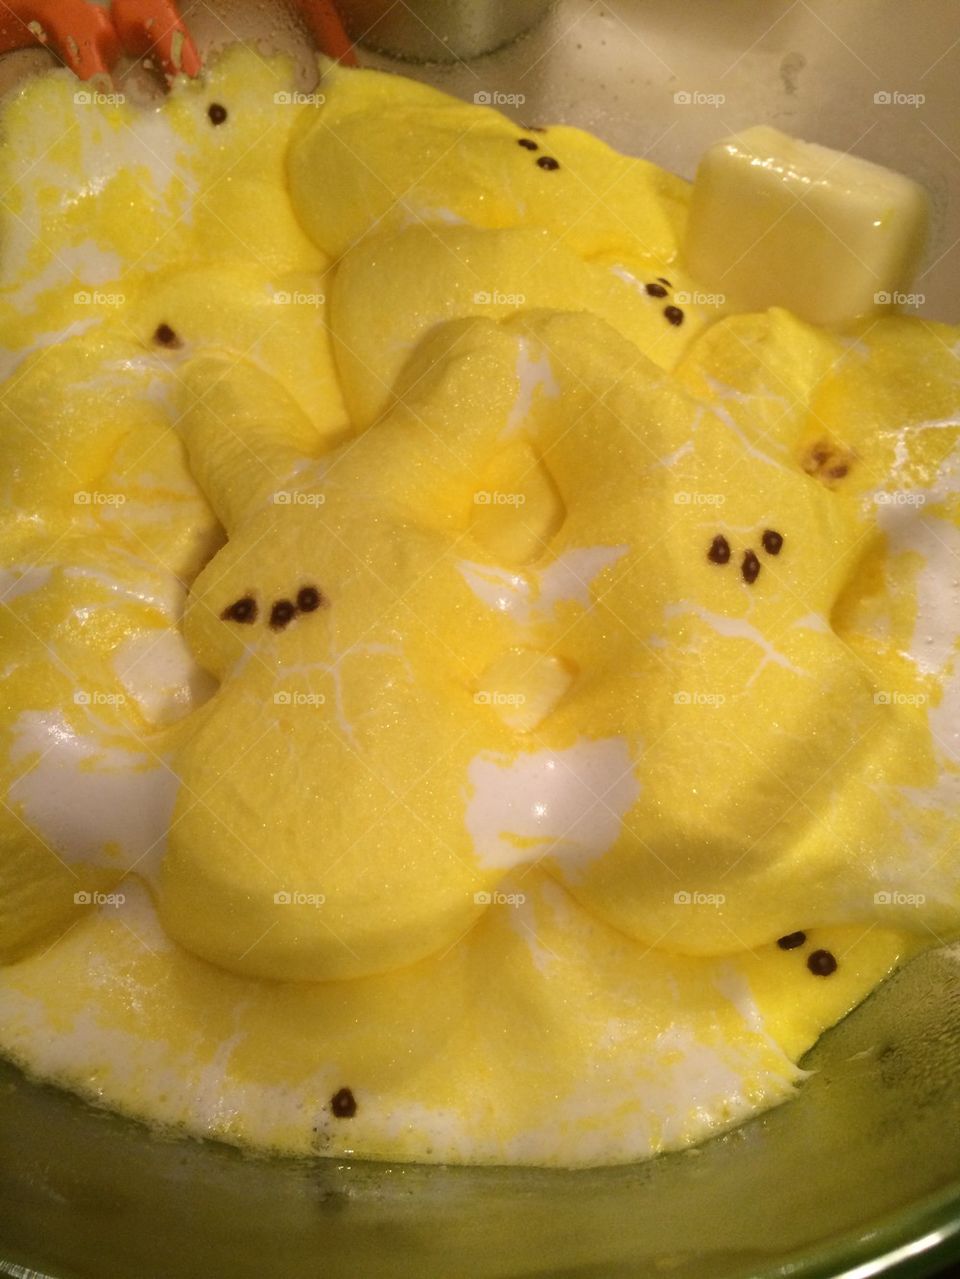 Melted peeps